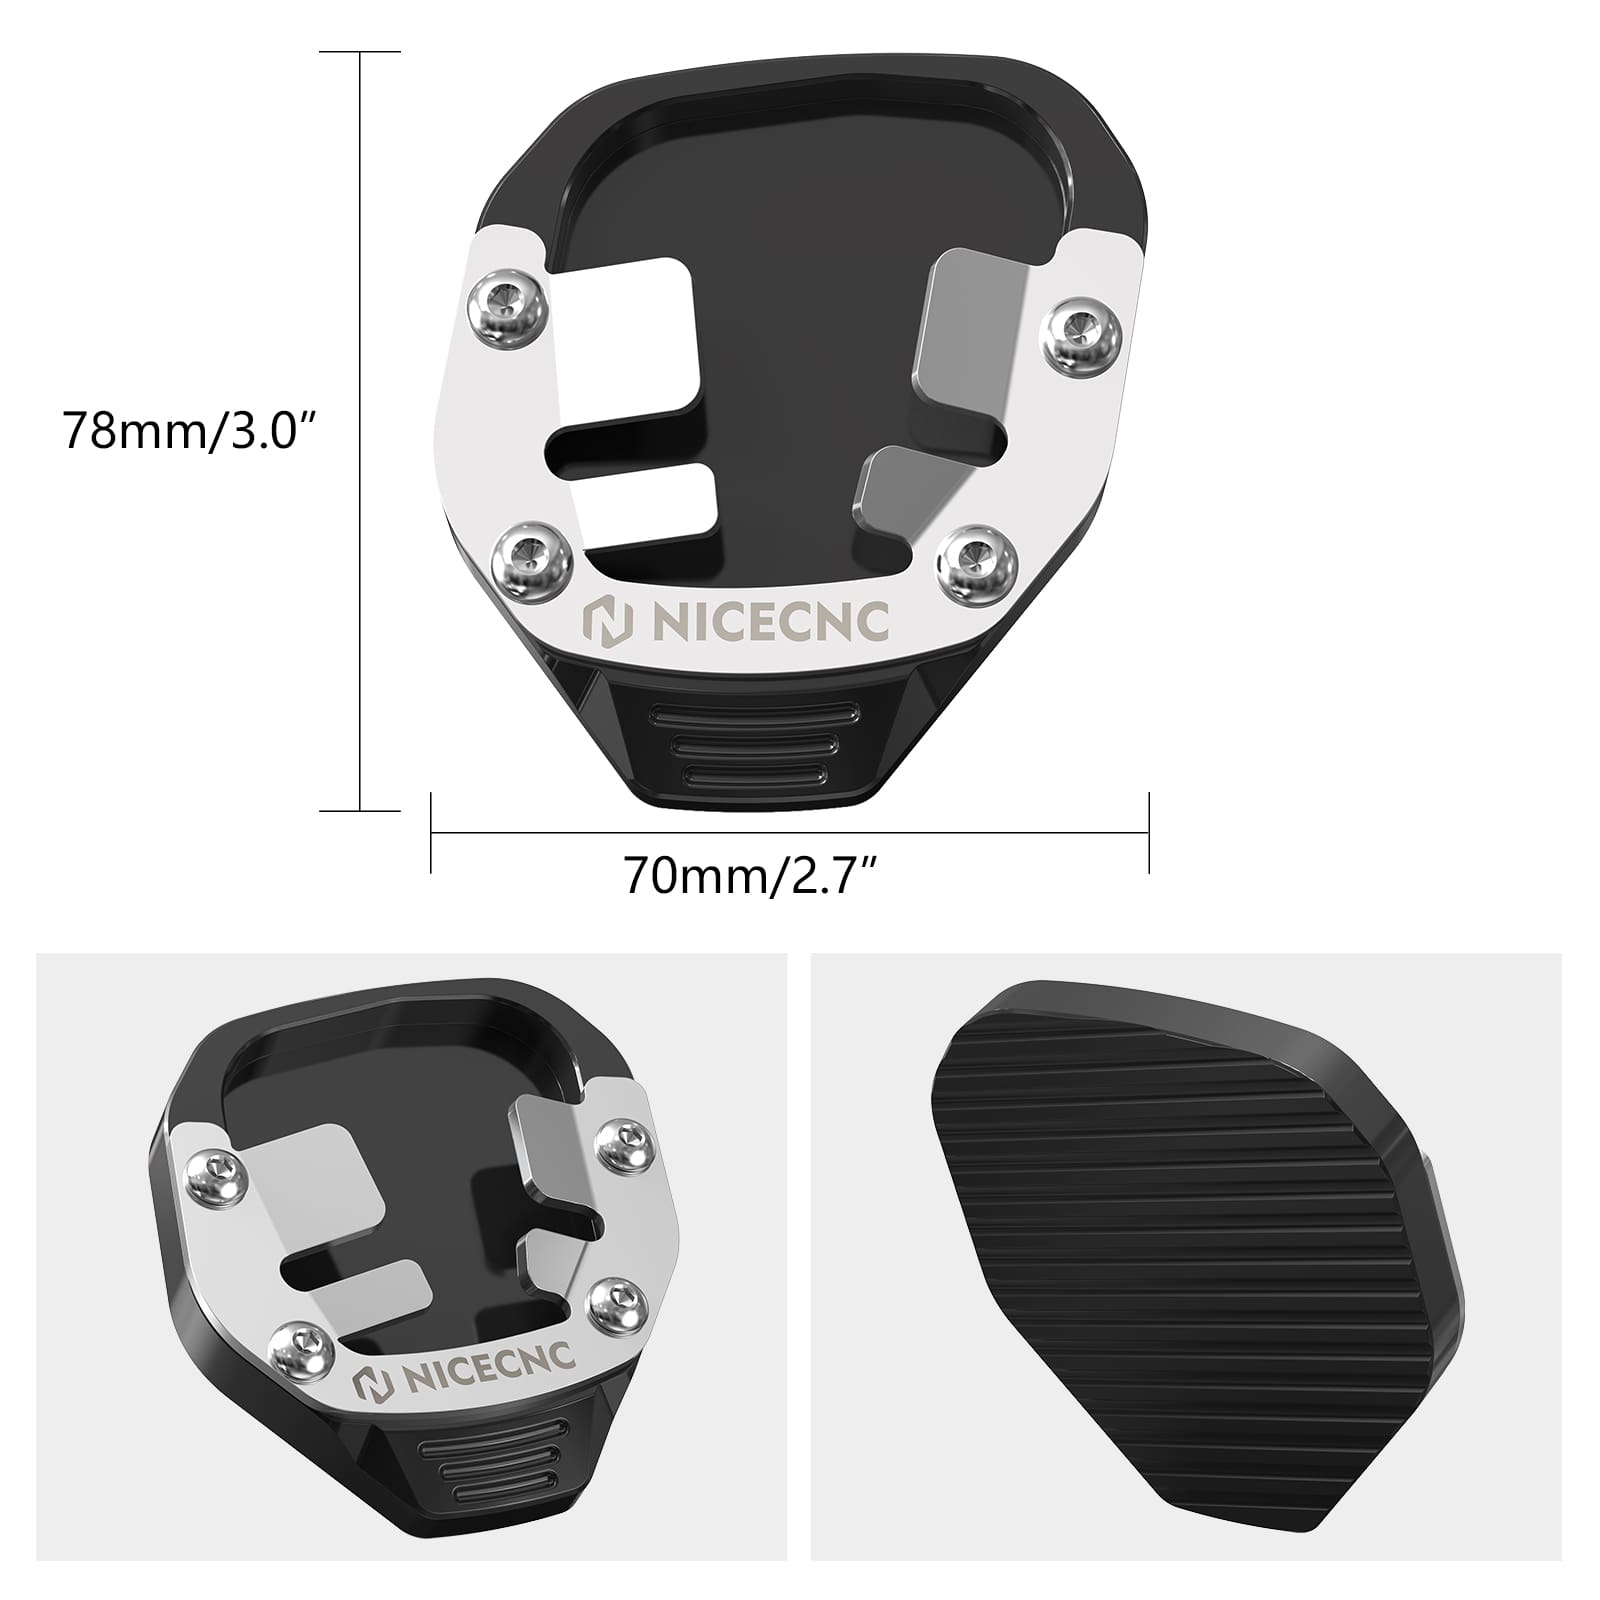 Kickstand Side Stand Pad Extension for Yamaha Tenere 700 XTZ700 2019-2024